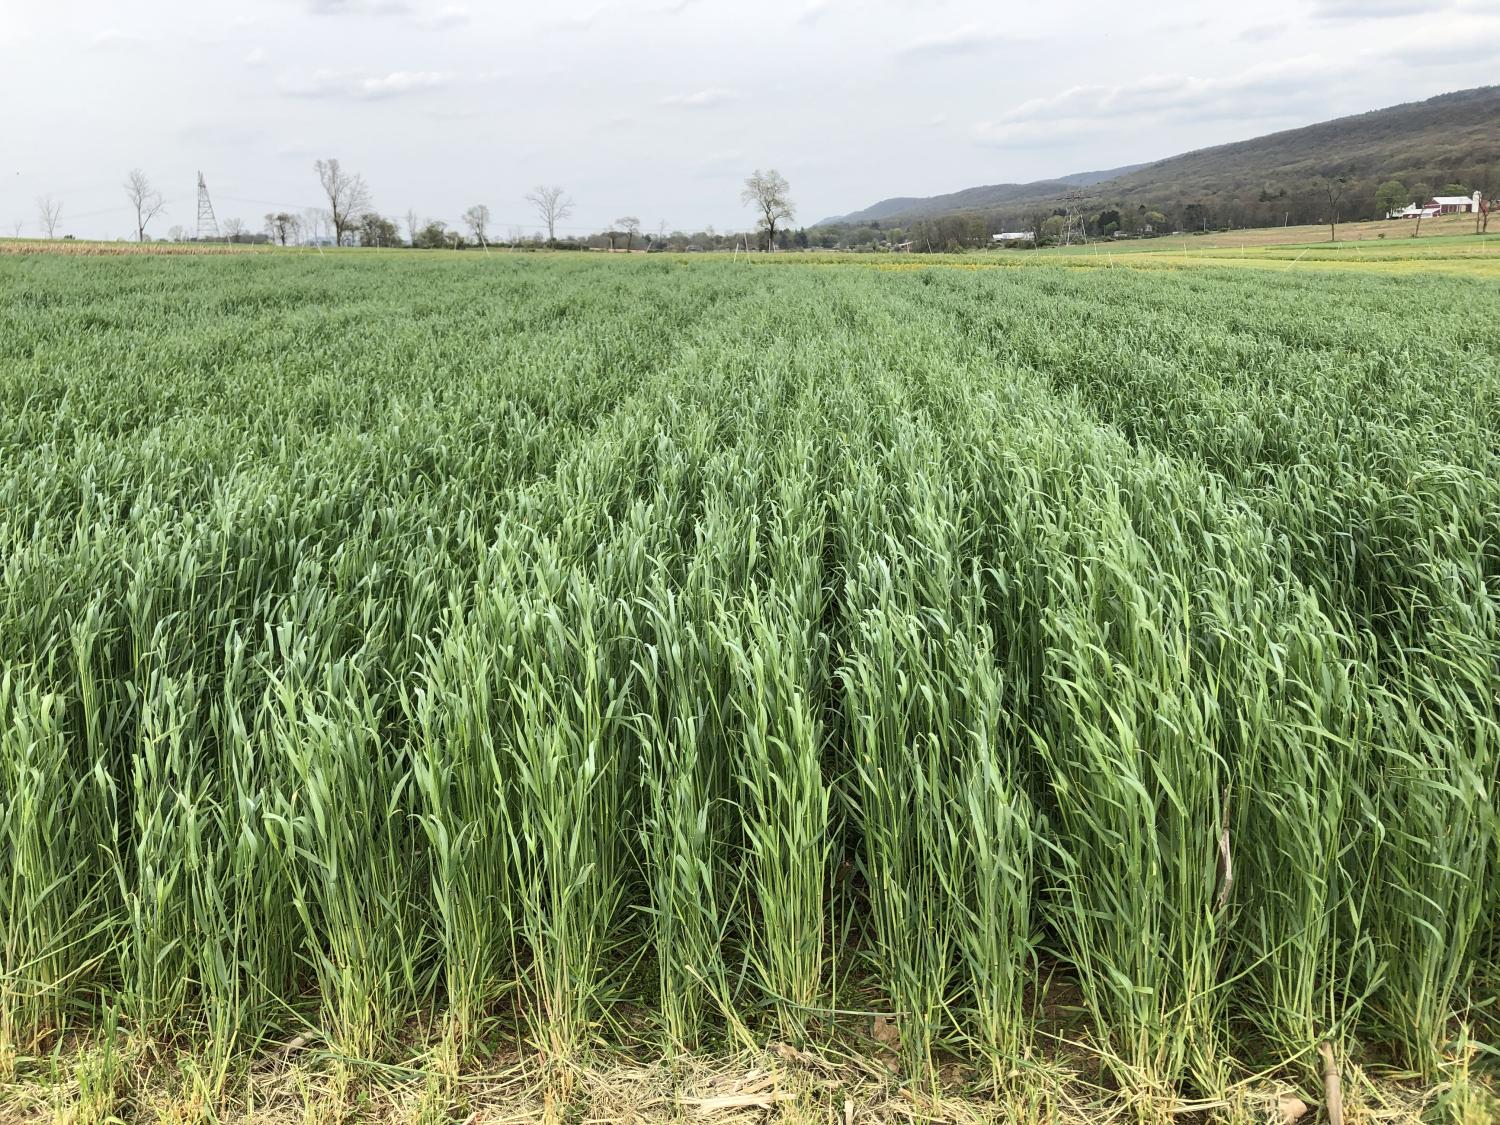 The researchers found that double cropping increased and stabilized the farm’s feed production by providing forage from a winter rye crop (shown) with less dependency on the summer crops of corn silage and perennial cool-season grasses. Credit: Heather Karsten. All Rights Reserved.